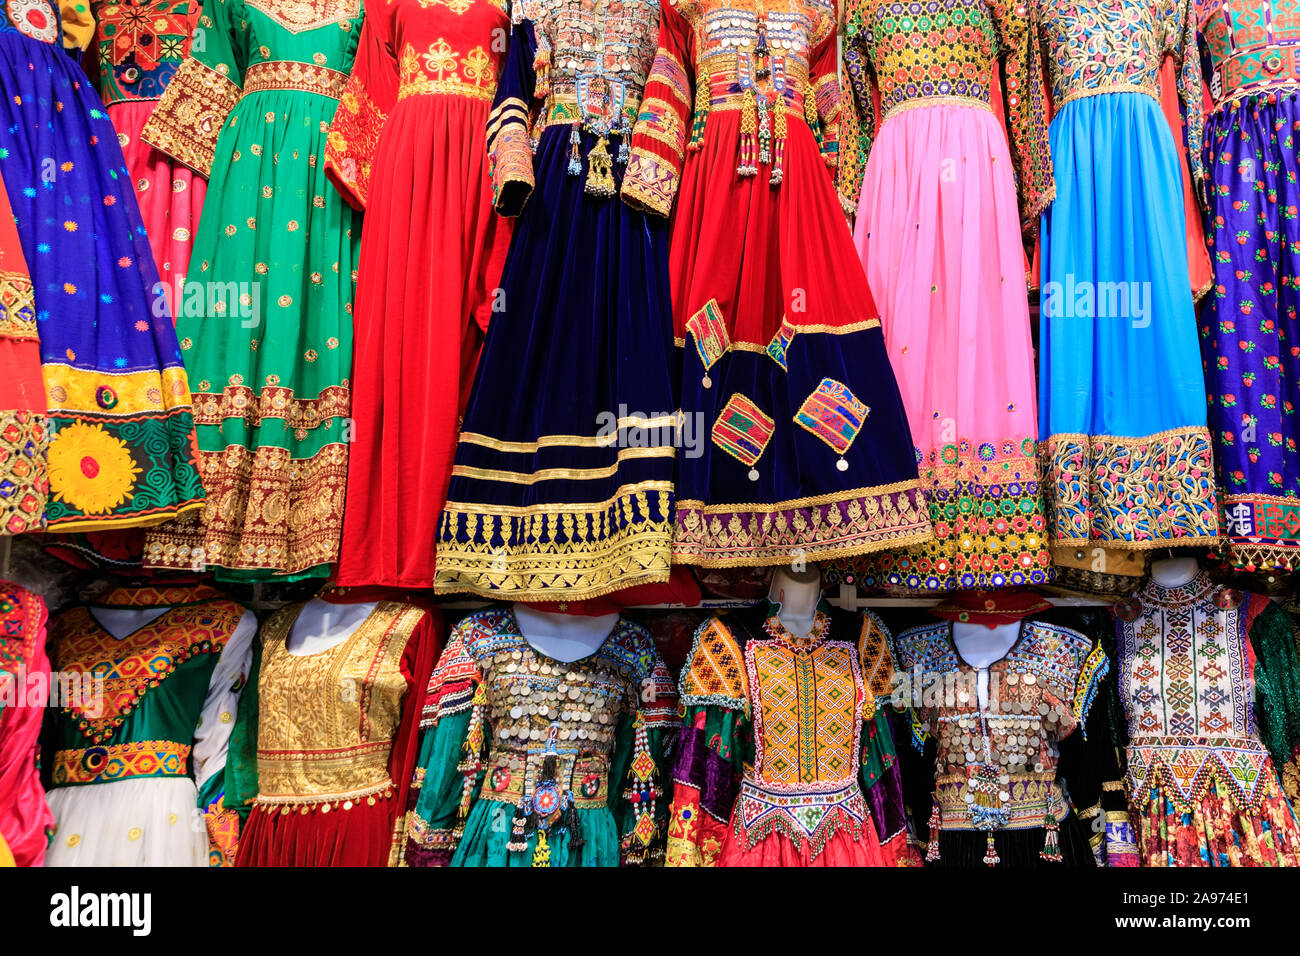 Afghani traditional dresses and colourful Afghan Asian clothing in shop display Stock Photo